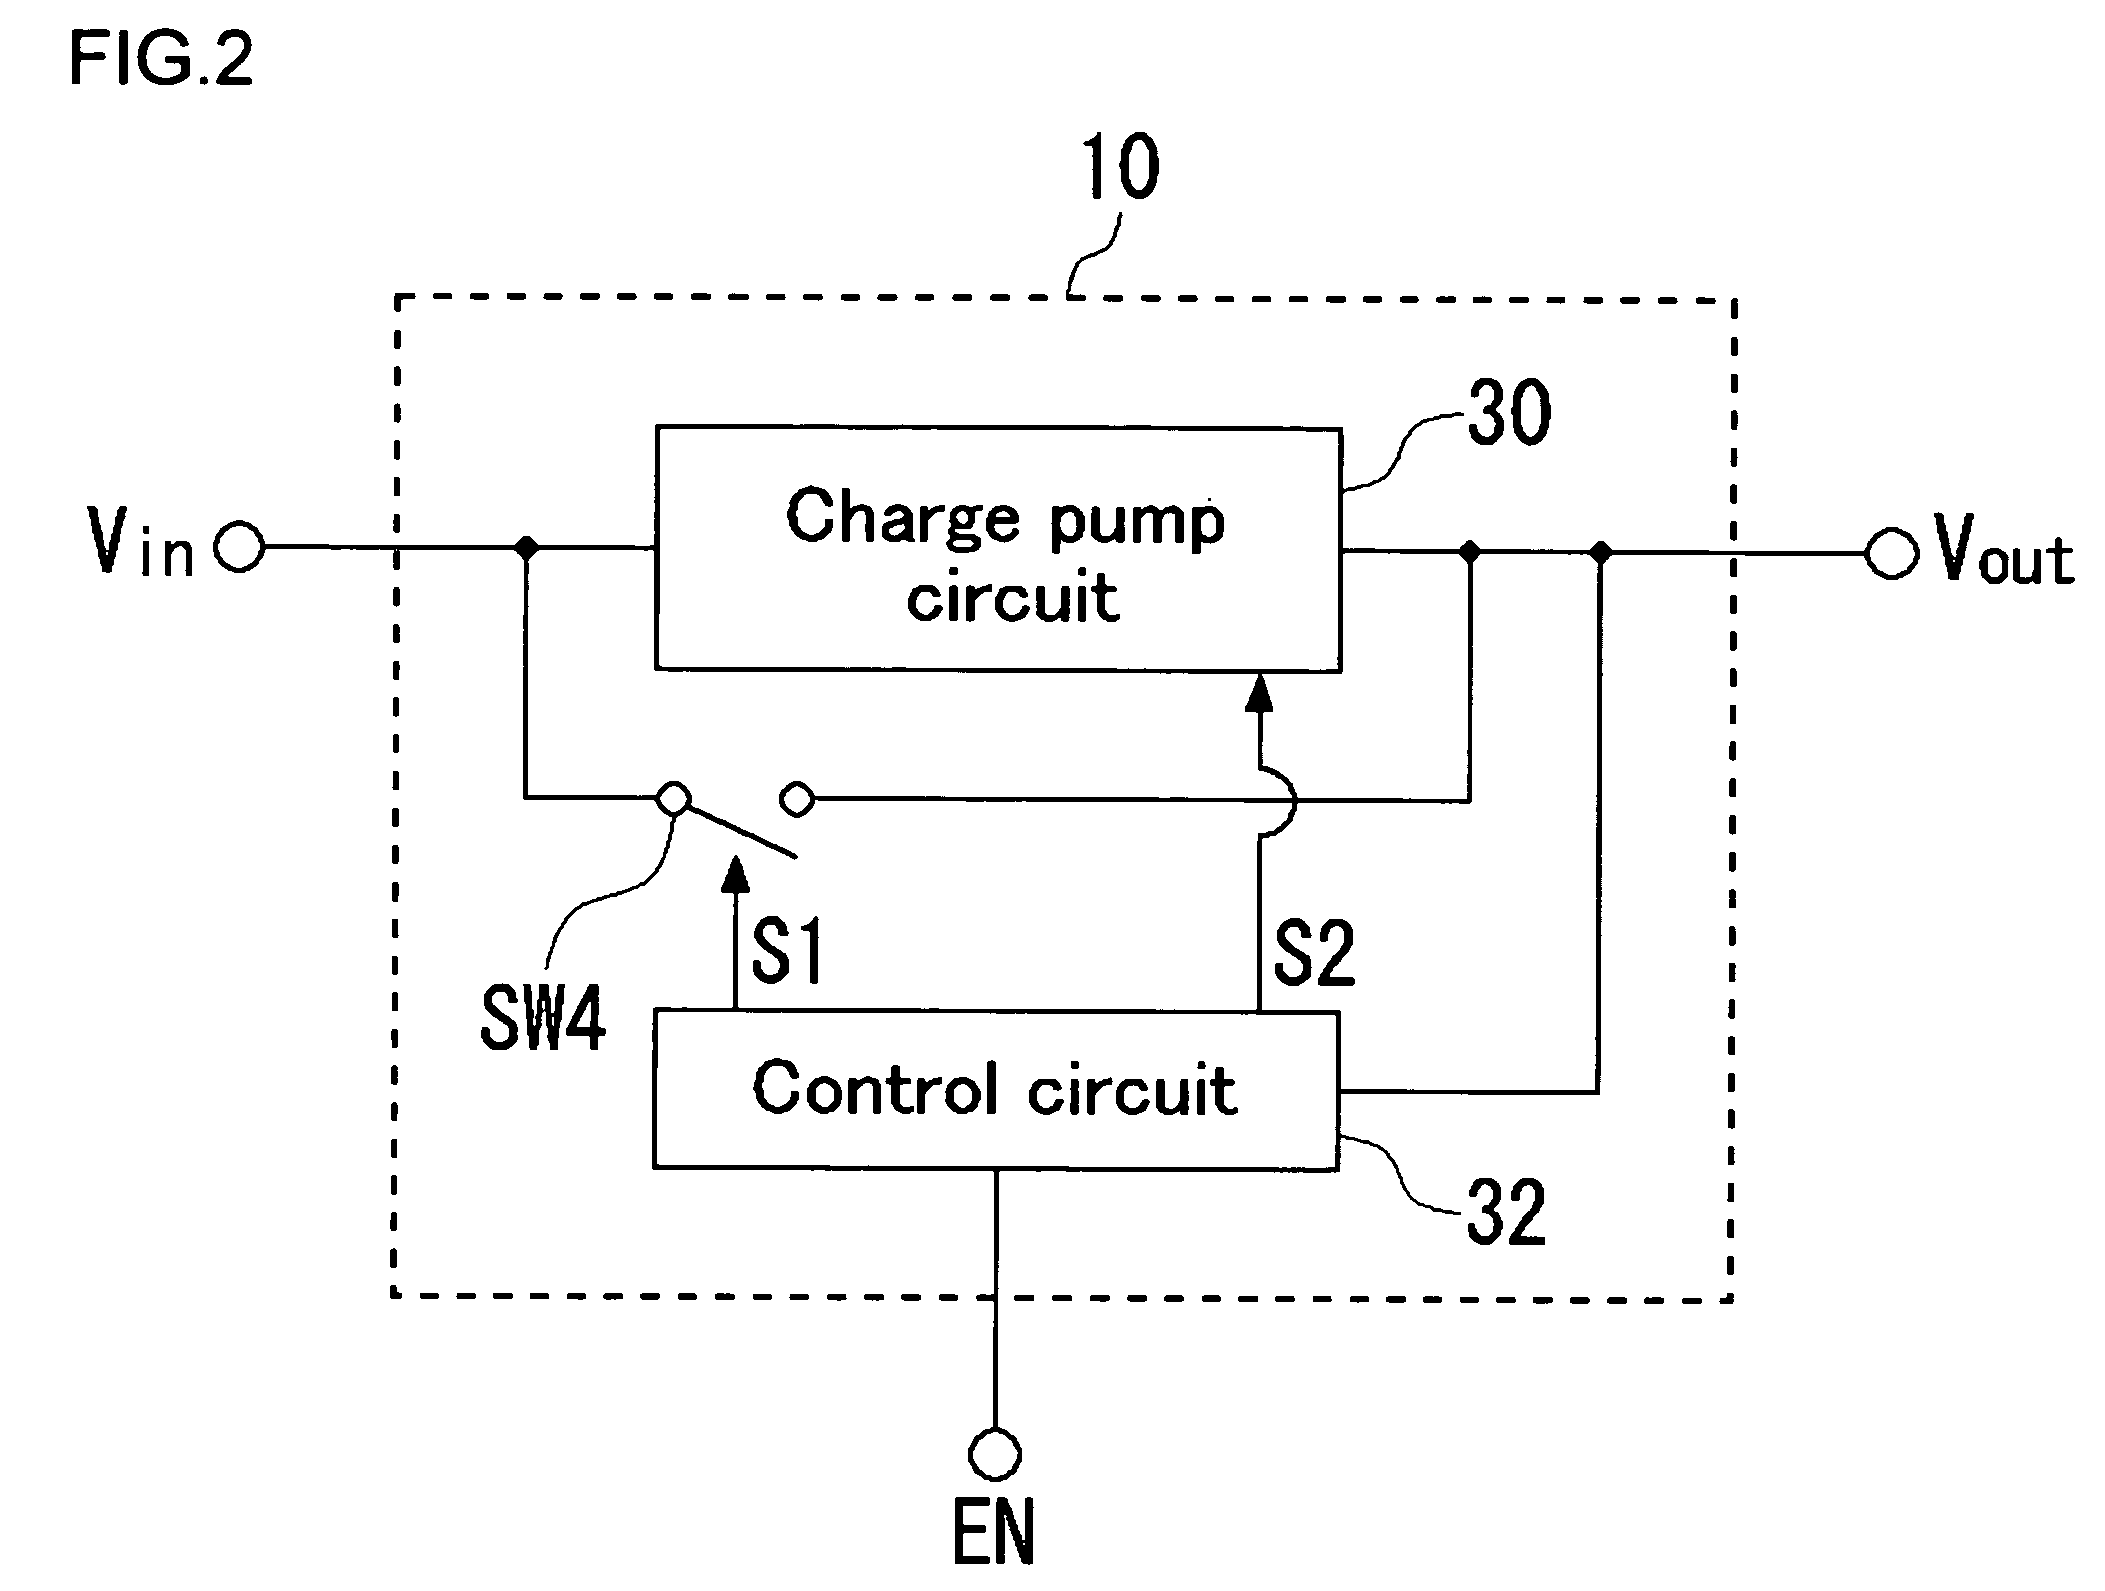 Power supply apparatus provided with regulation function and boosting of a regulated voltage